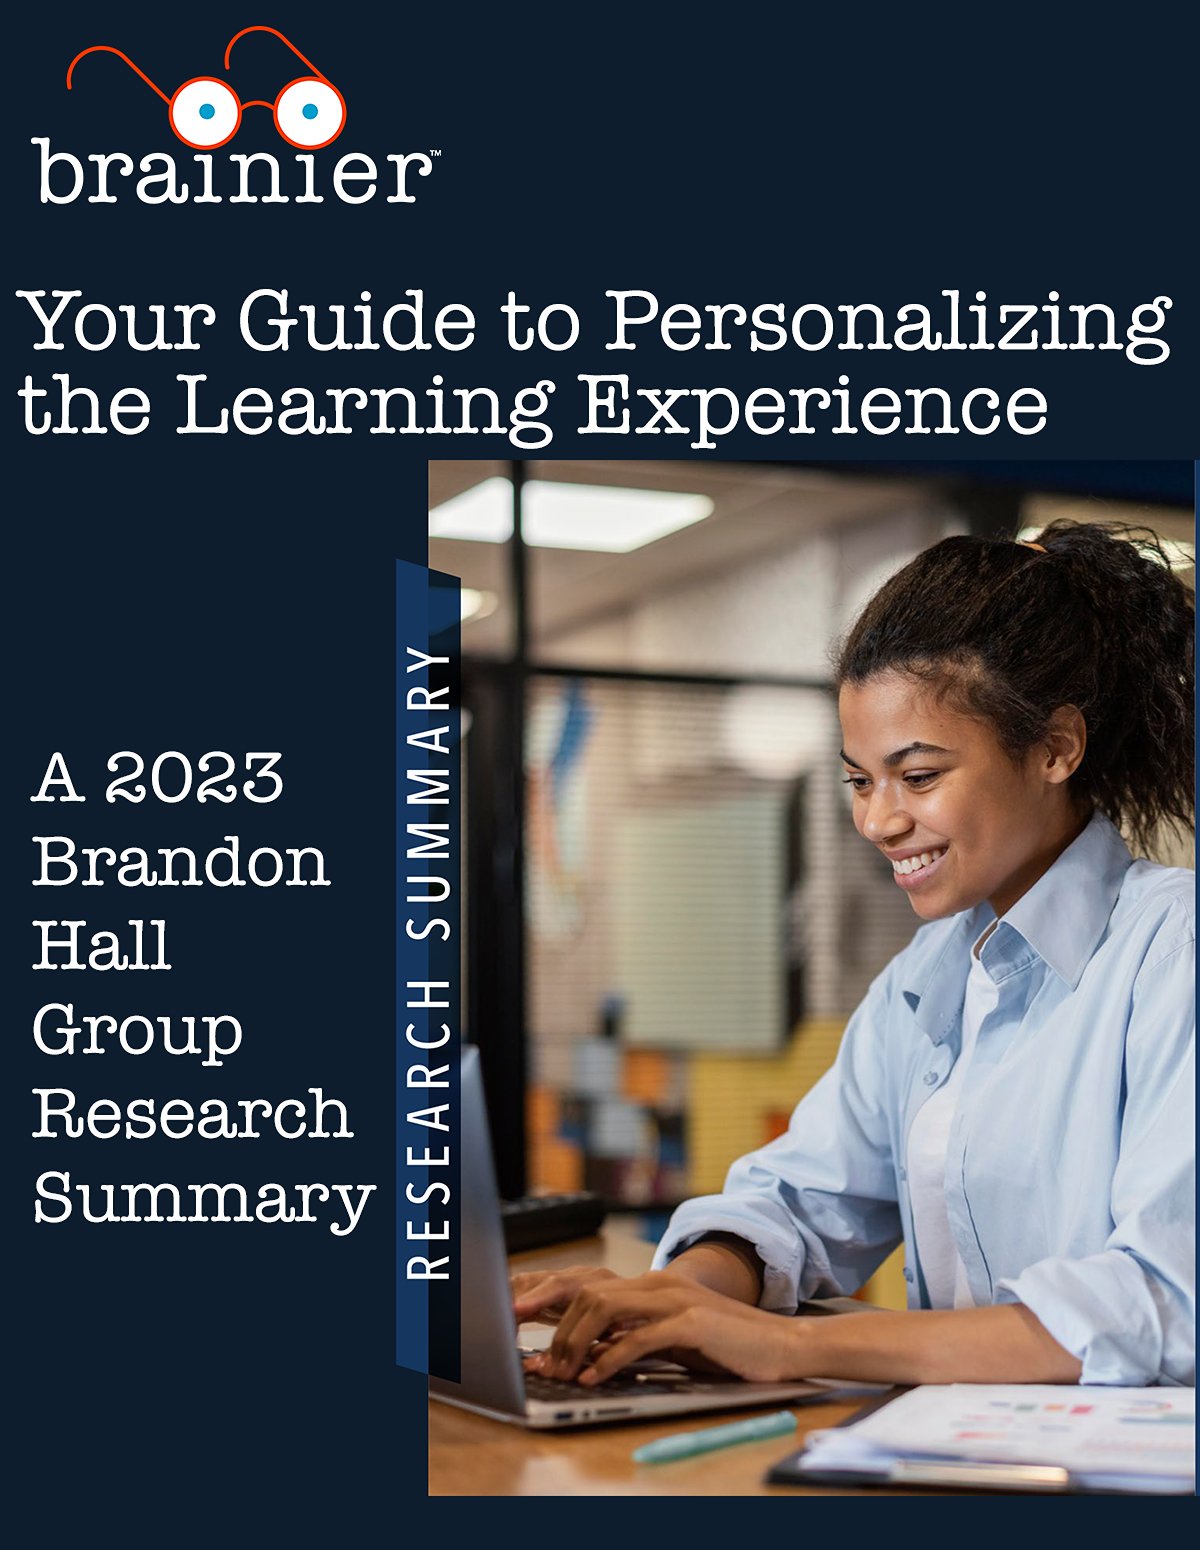 Your Guide to Personalizing the Learning Experience